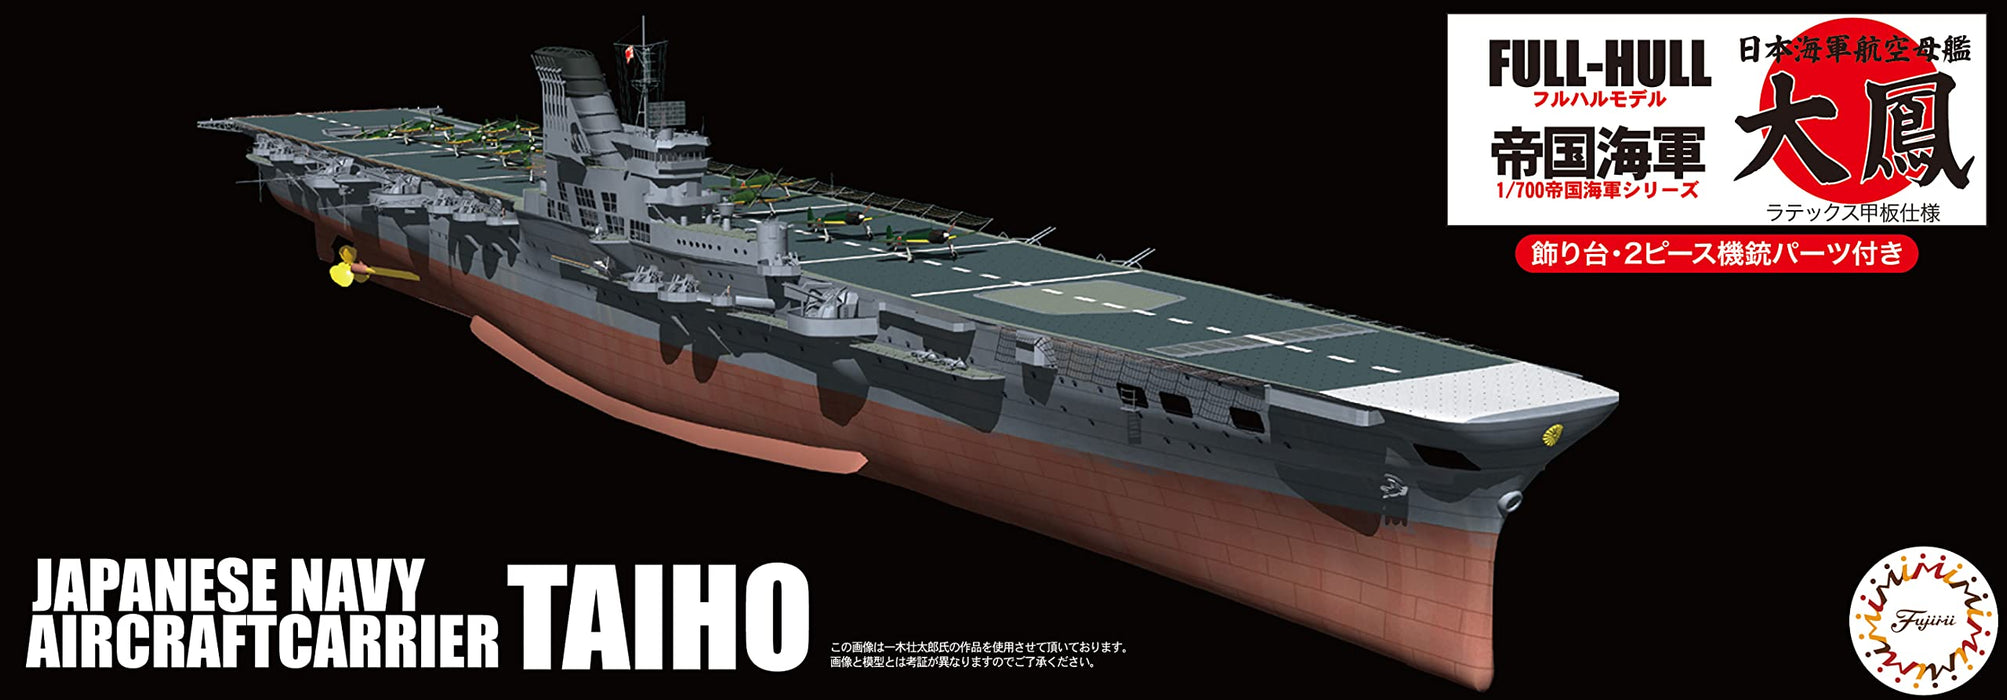 Fujimi Model 1/700 Imperial Navy Series No.18 Japanese Navy Aircraft Carrier Taiho (Latex Deck) Full Hull Model Fh18